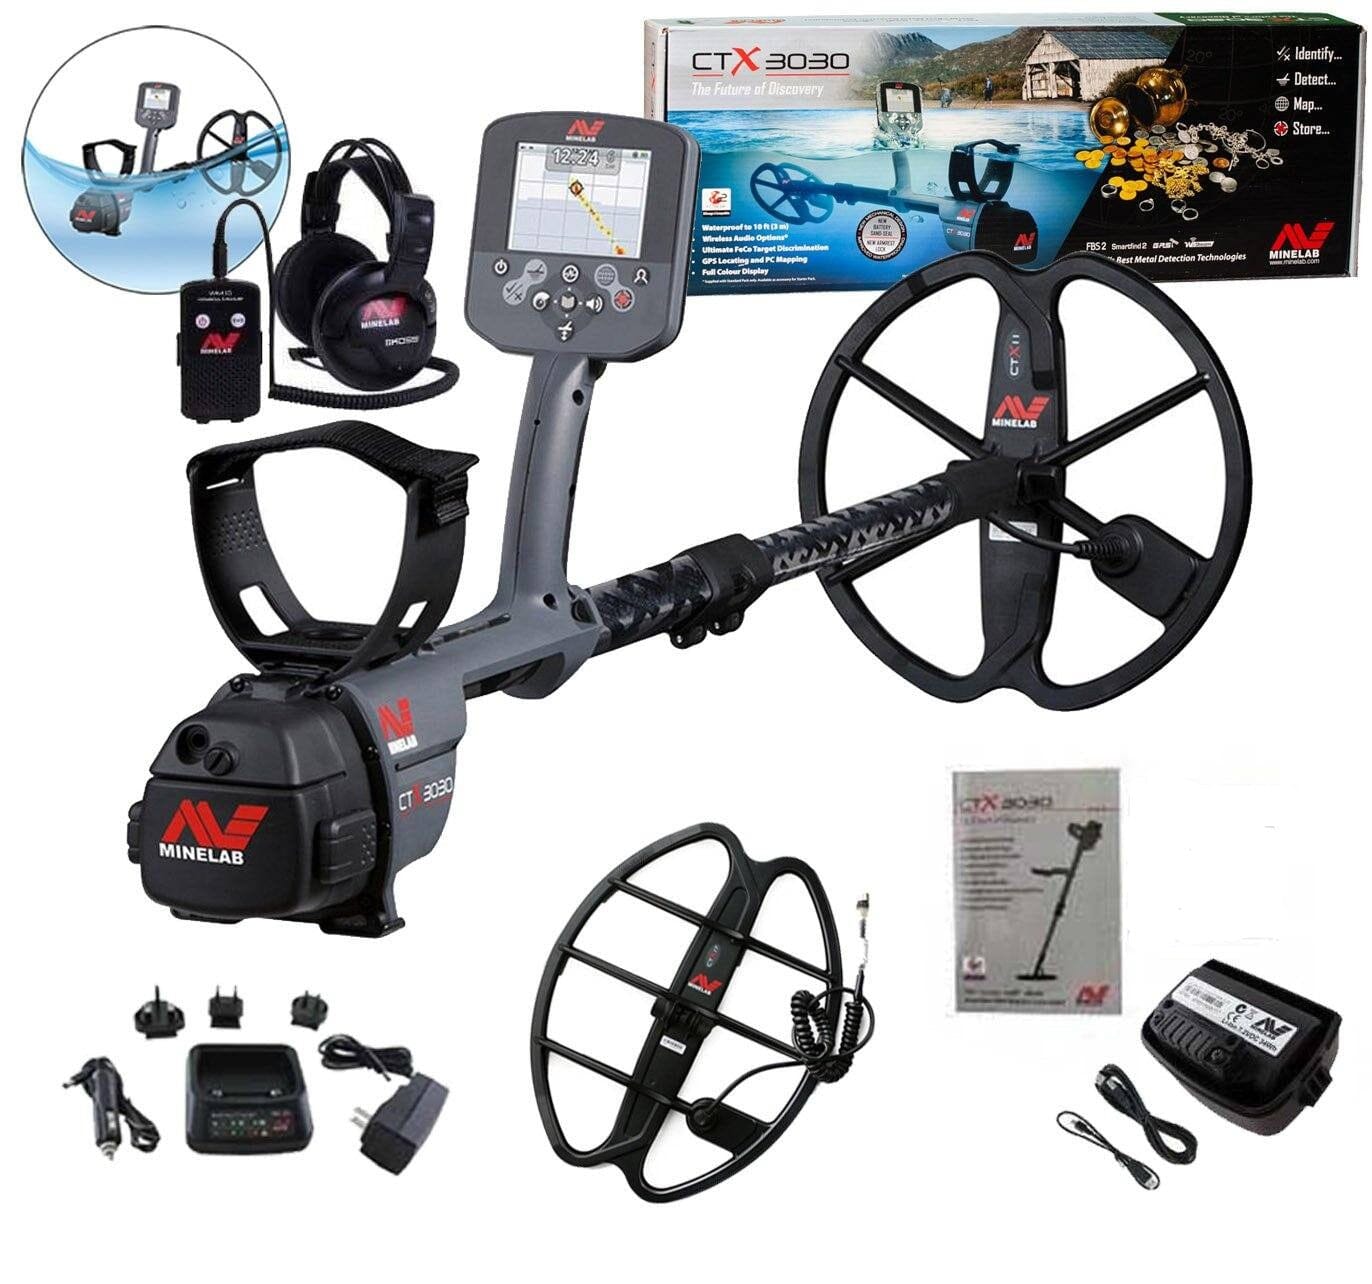 Minelab CTX 3030 Waterproof Metal Detector, 17" DD Smart Coil and FREE Pro-Find 40